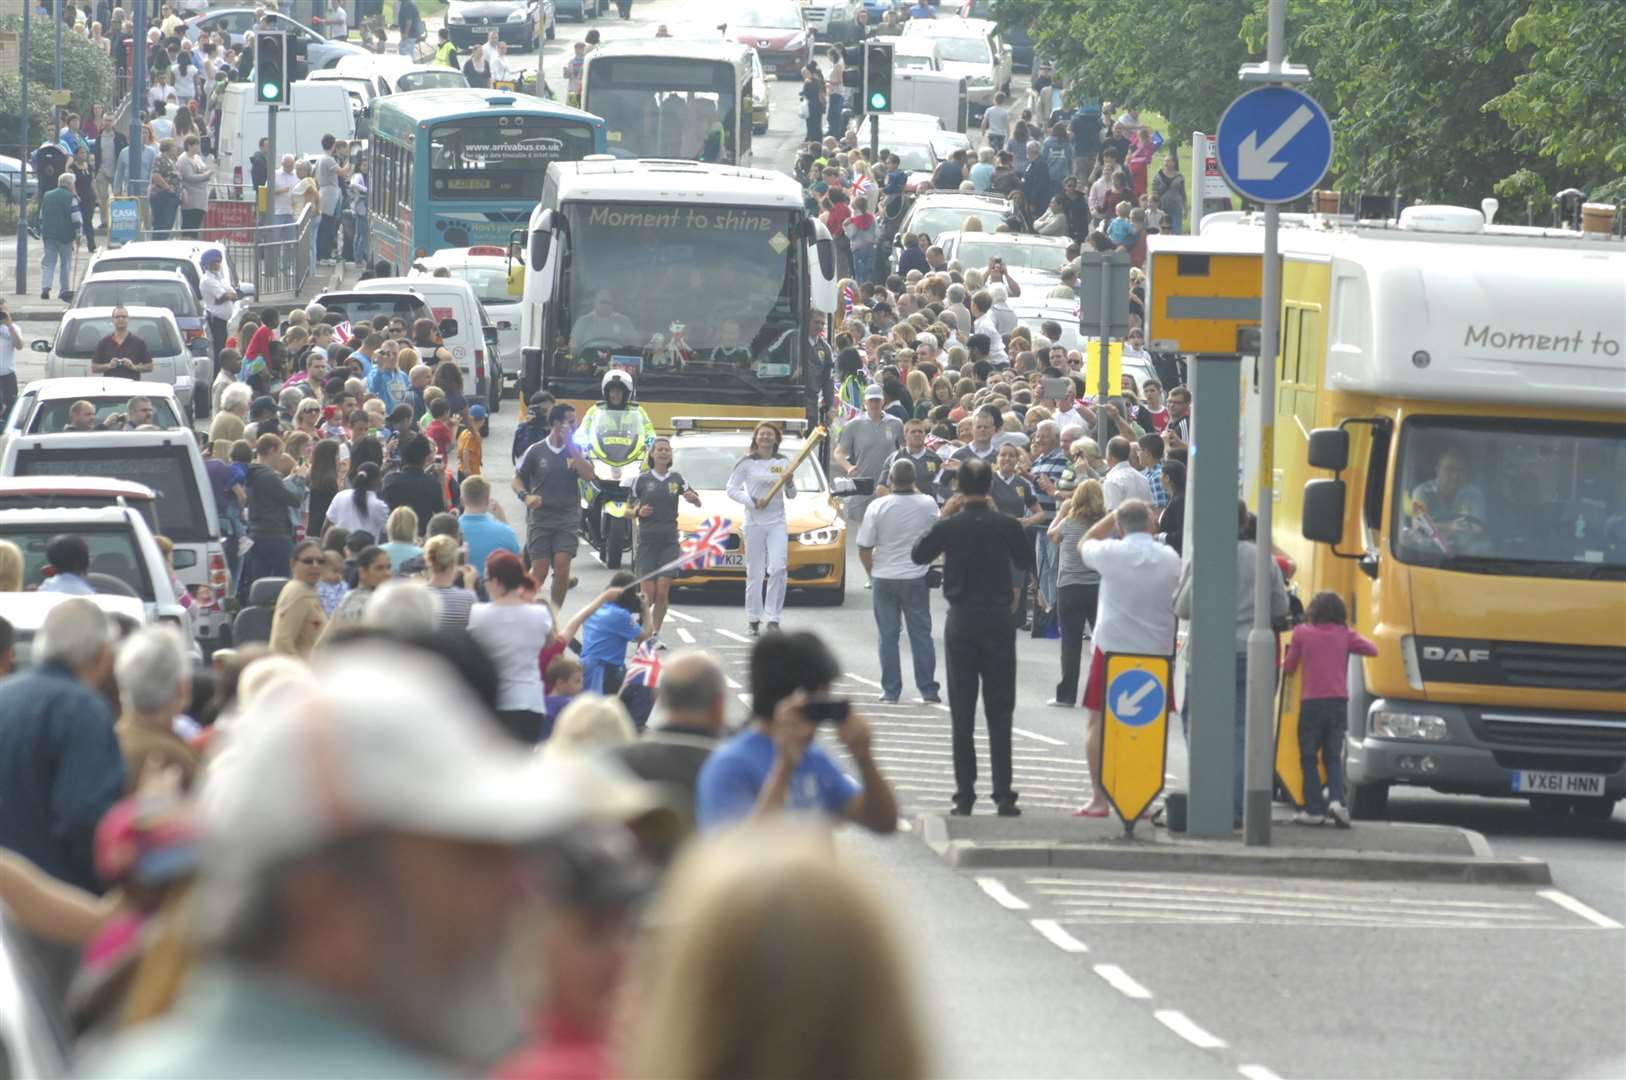 The crowds celebrate the torch passing through Gravesend, just before someone is arrested for making a grab for the flame